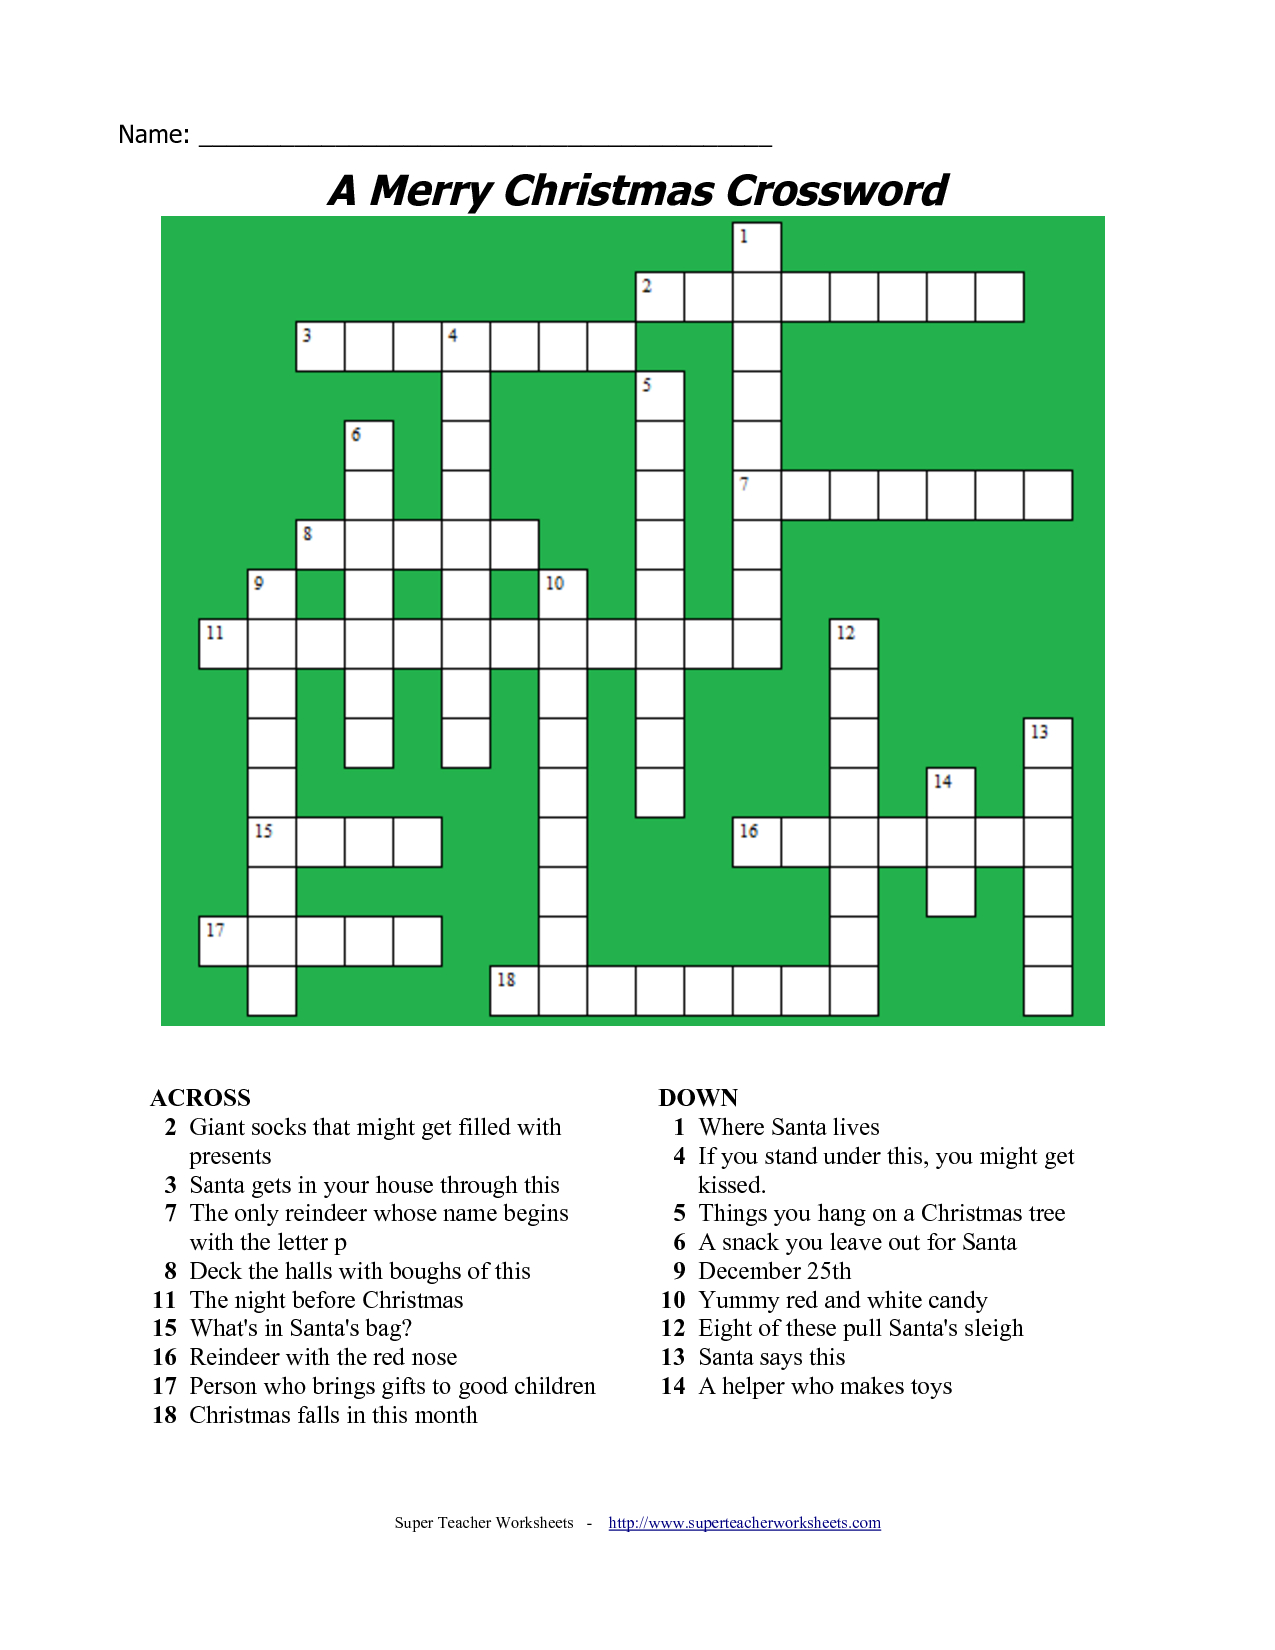 20 Fun Printable Christmas Crossword Puzzles | Kittybabylove - Free Printable Christmas Crossword Puzzles For Adults